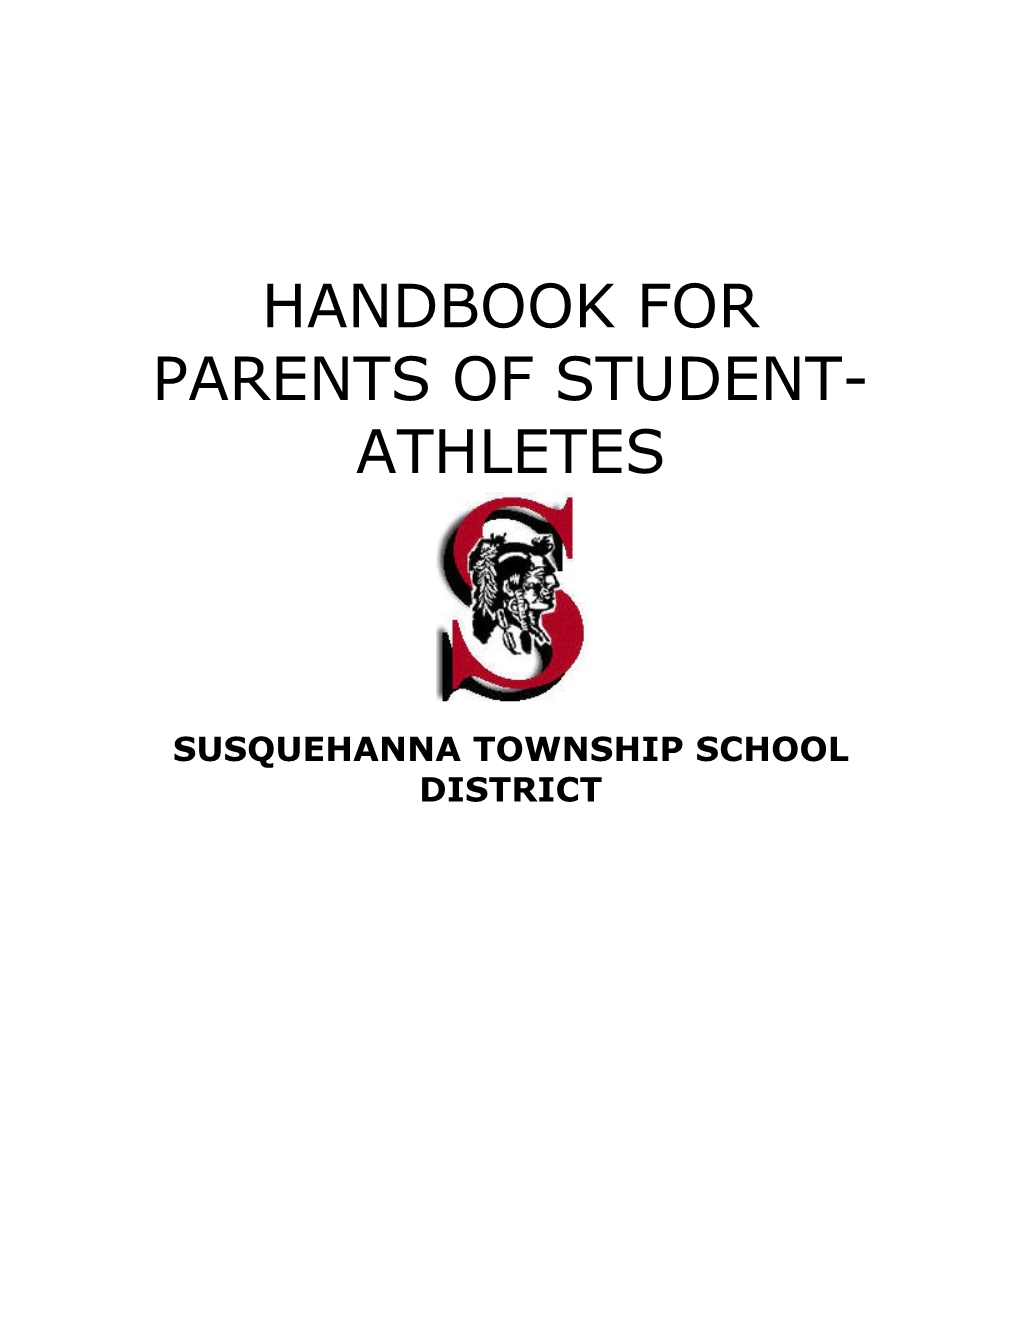 Handbook for Parents of Athletes